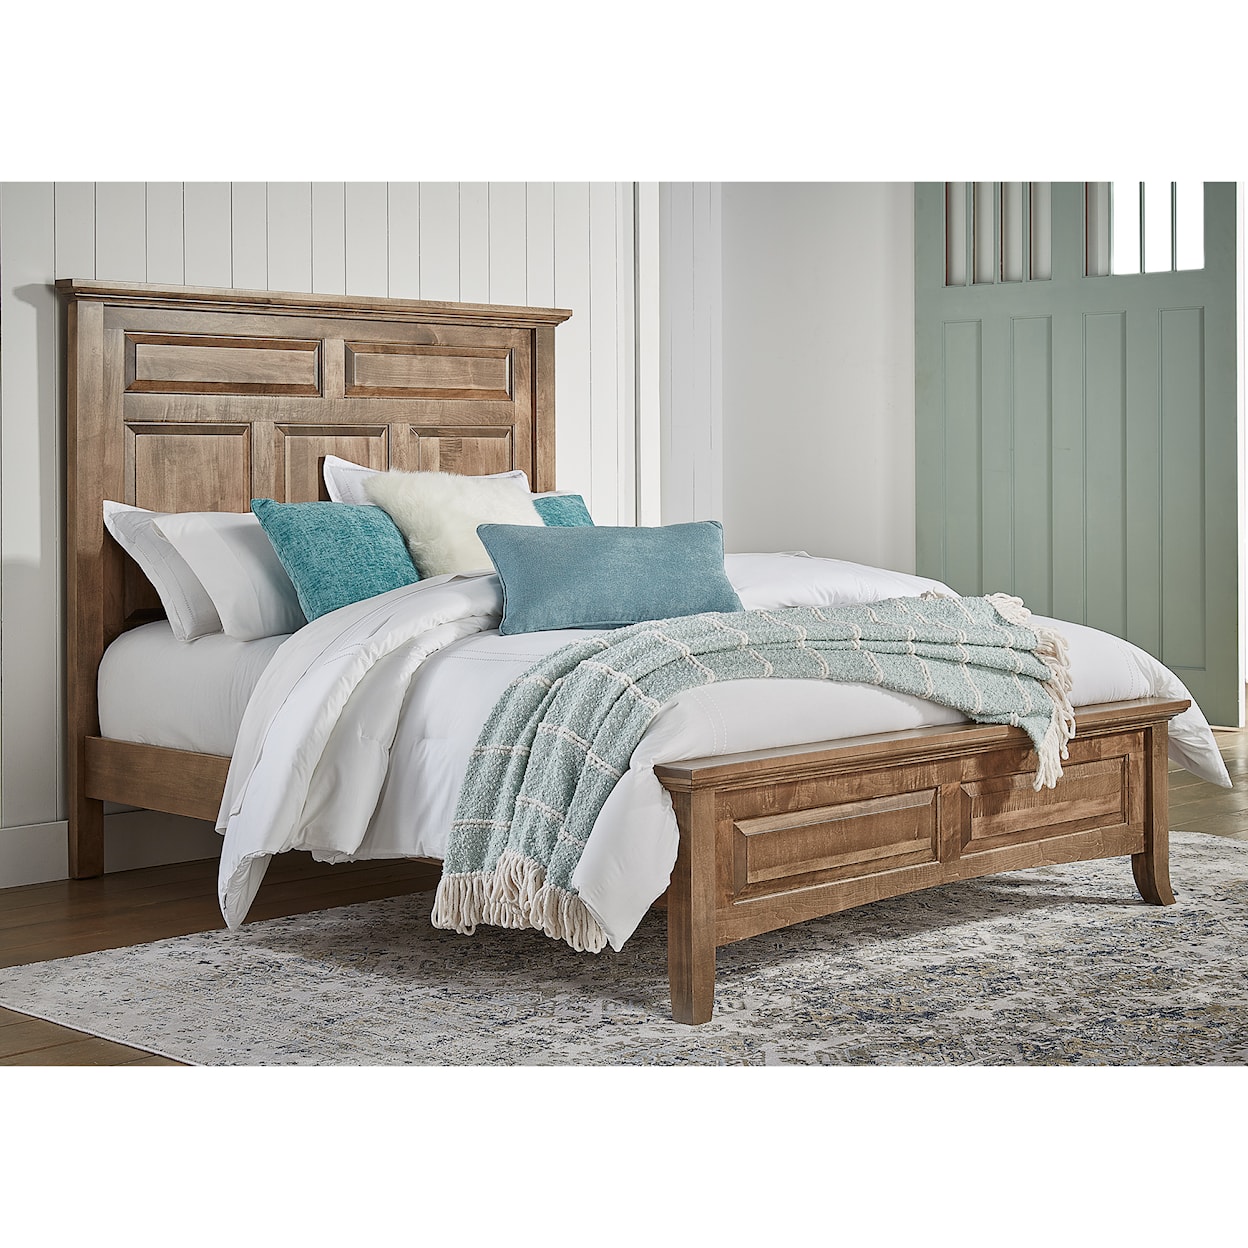 Archbold Furniture Provence King Bed